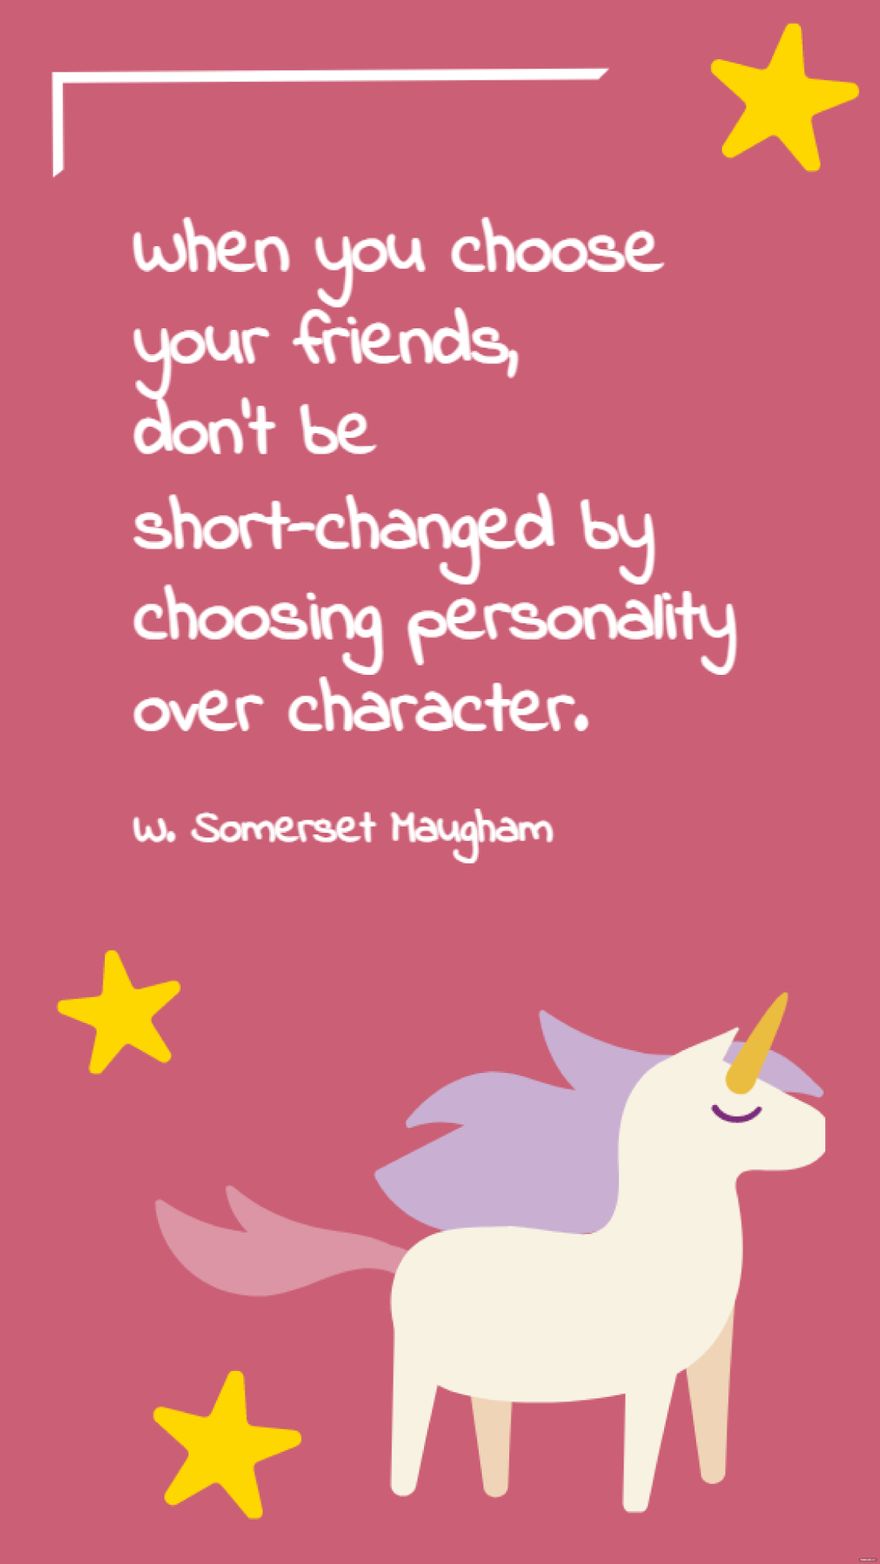 W. Somerset Maugham - When you choose your friends, don't be short-changed by choosing personality over character.